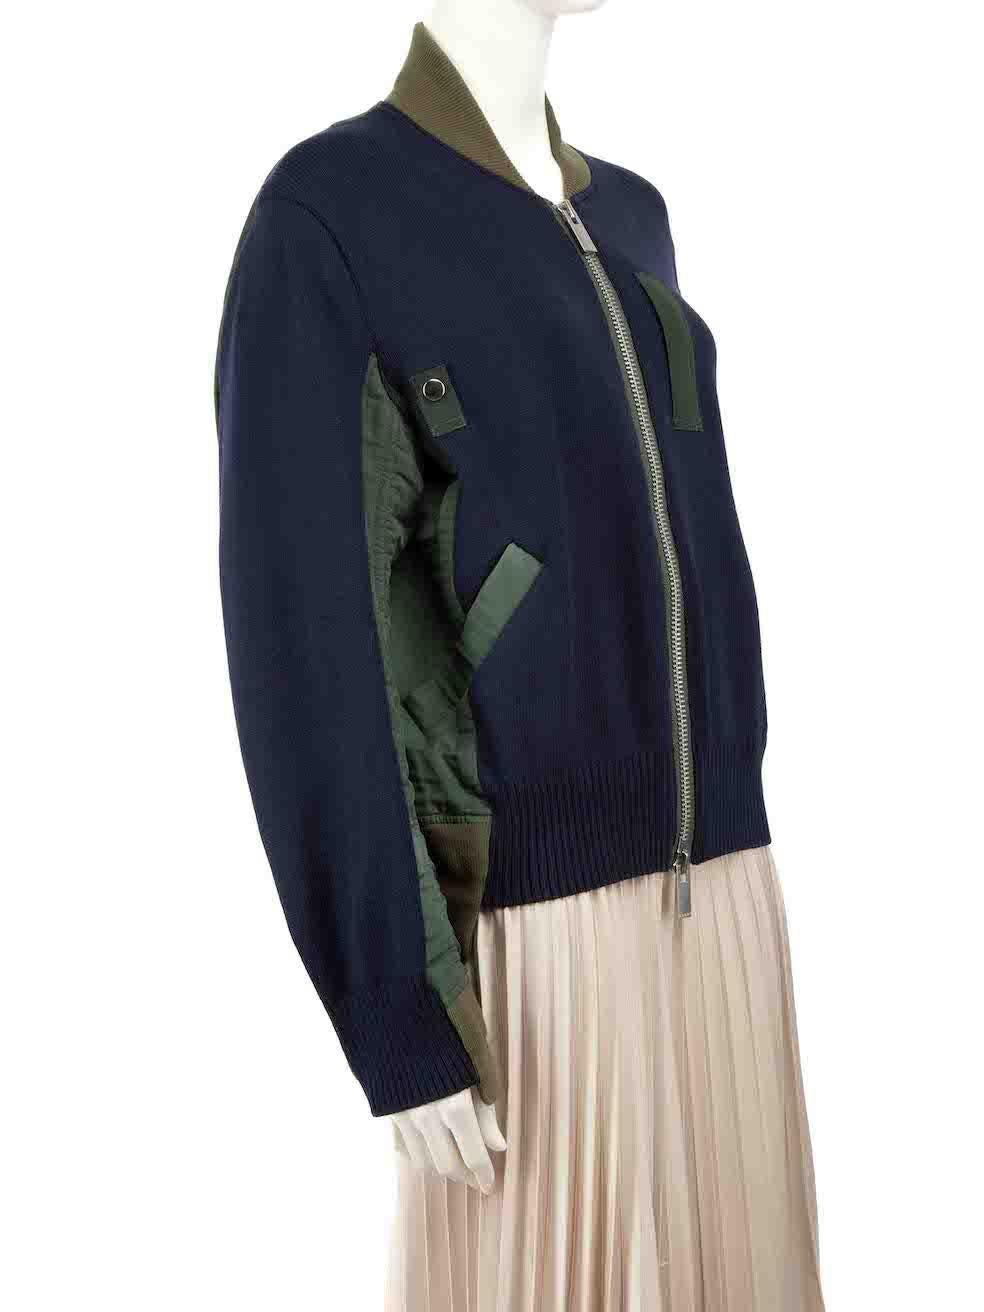 CONDITION is Good. Minor wear to jacket is evident. Light wear to the composition with a number of very small plucks to the knit found through the centre front on this used Sacai designer resale item.
 
 Details
 Multicolour navy and green
 Cotton
